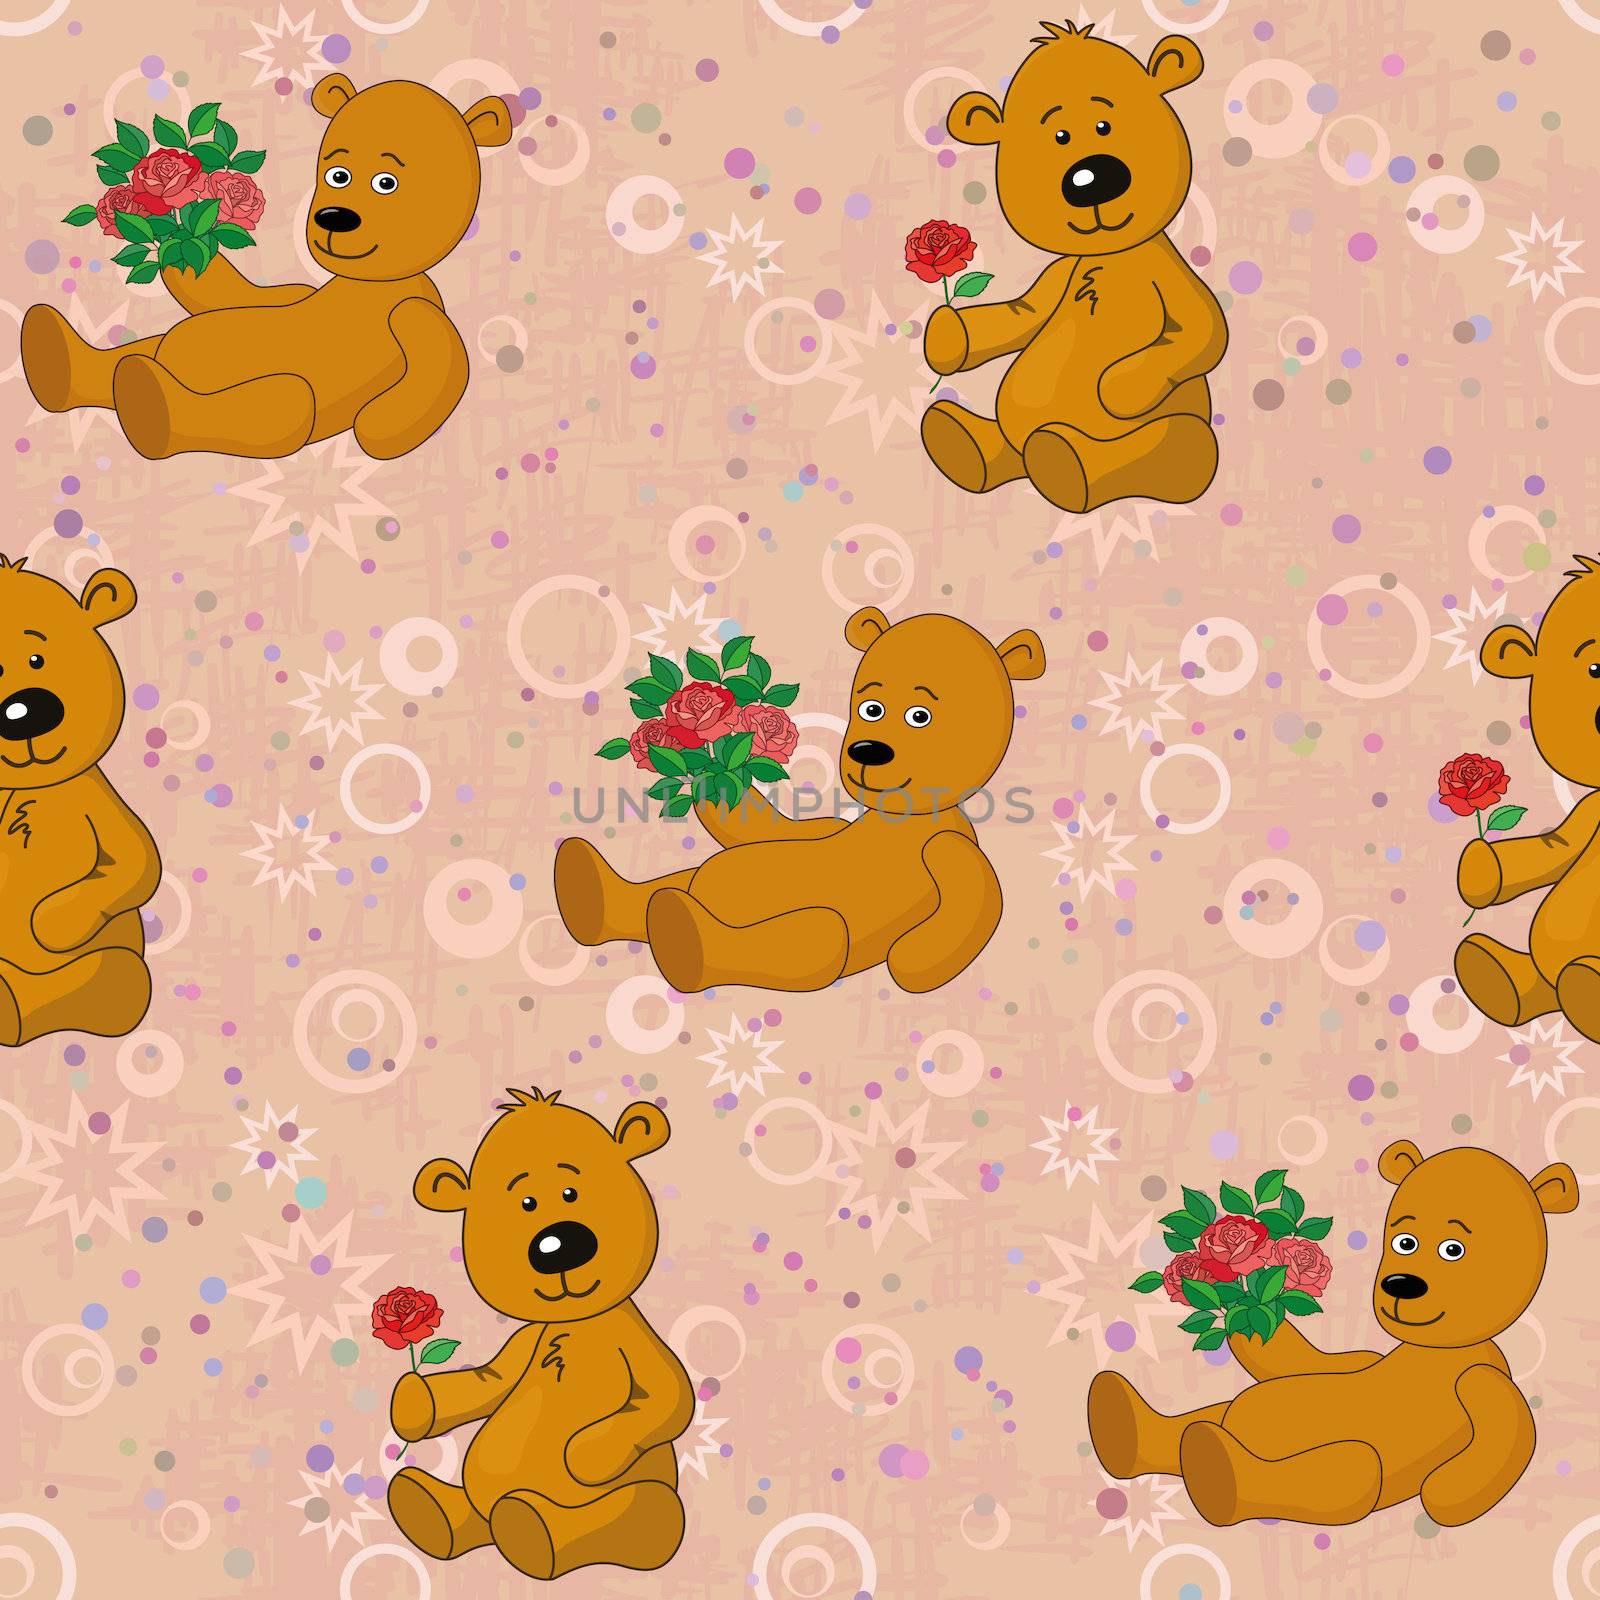 Seamless pattern, teddy bears and gifts flowers by alexcoolok